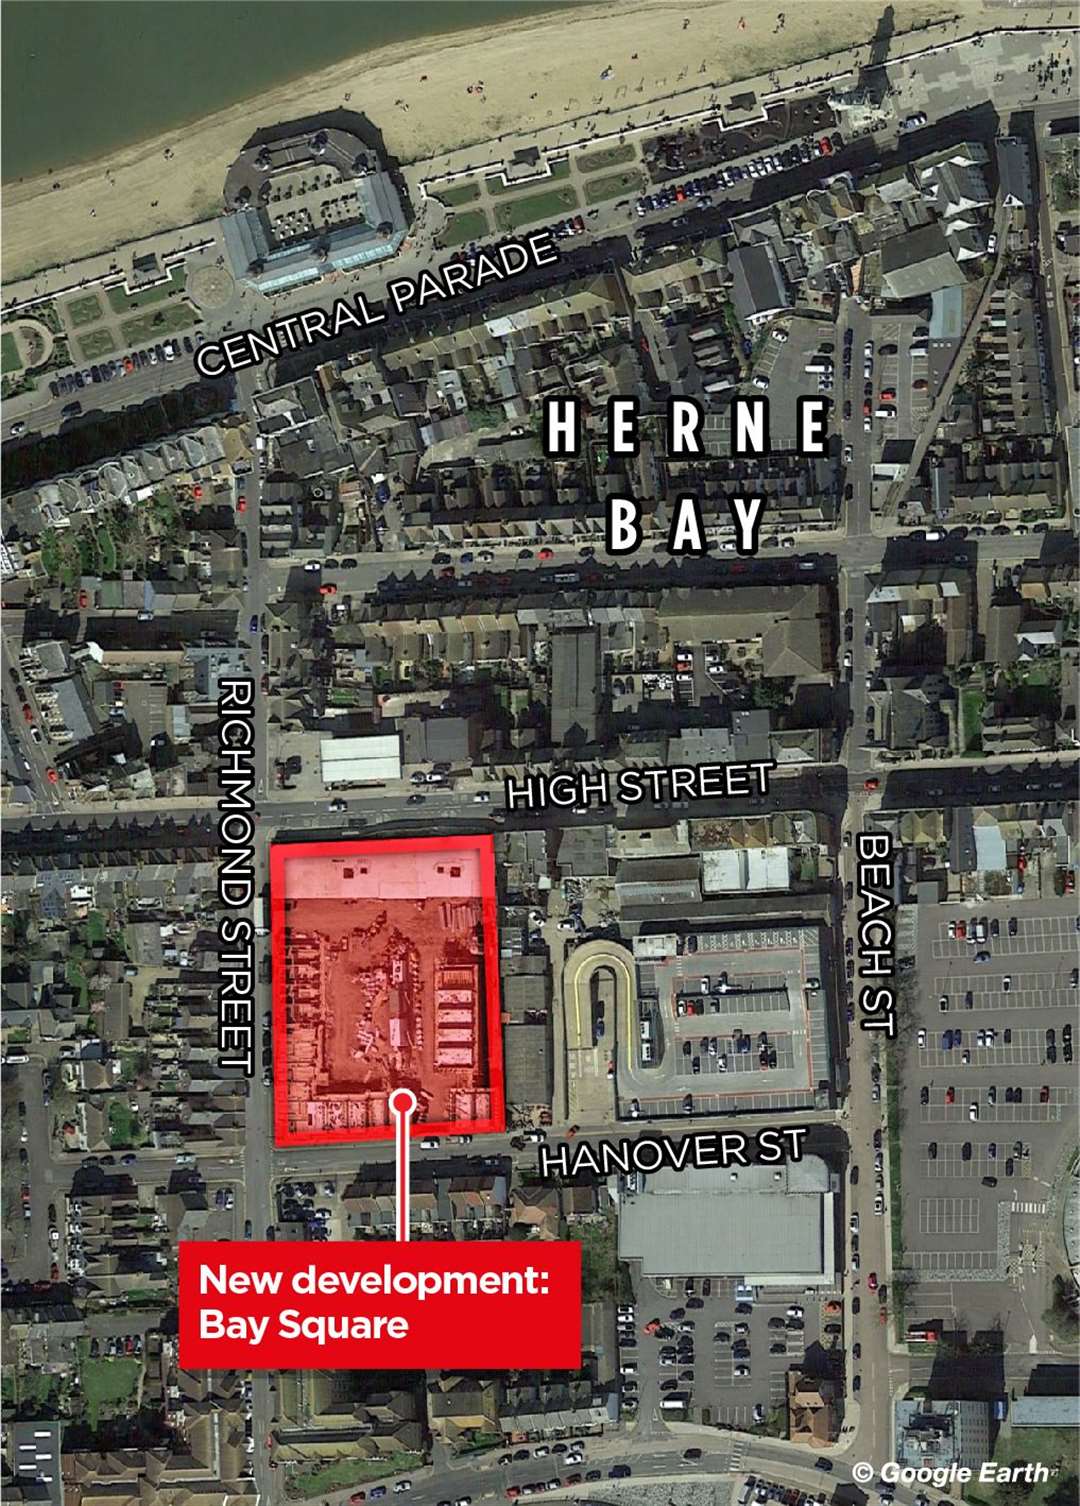 The new development in Herne Bay is located just off the high street